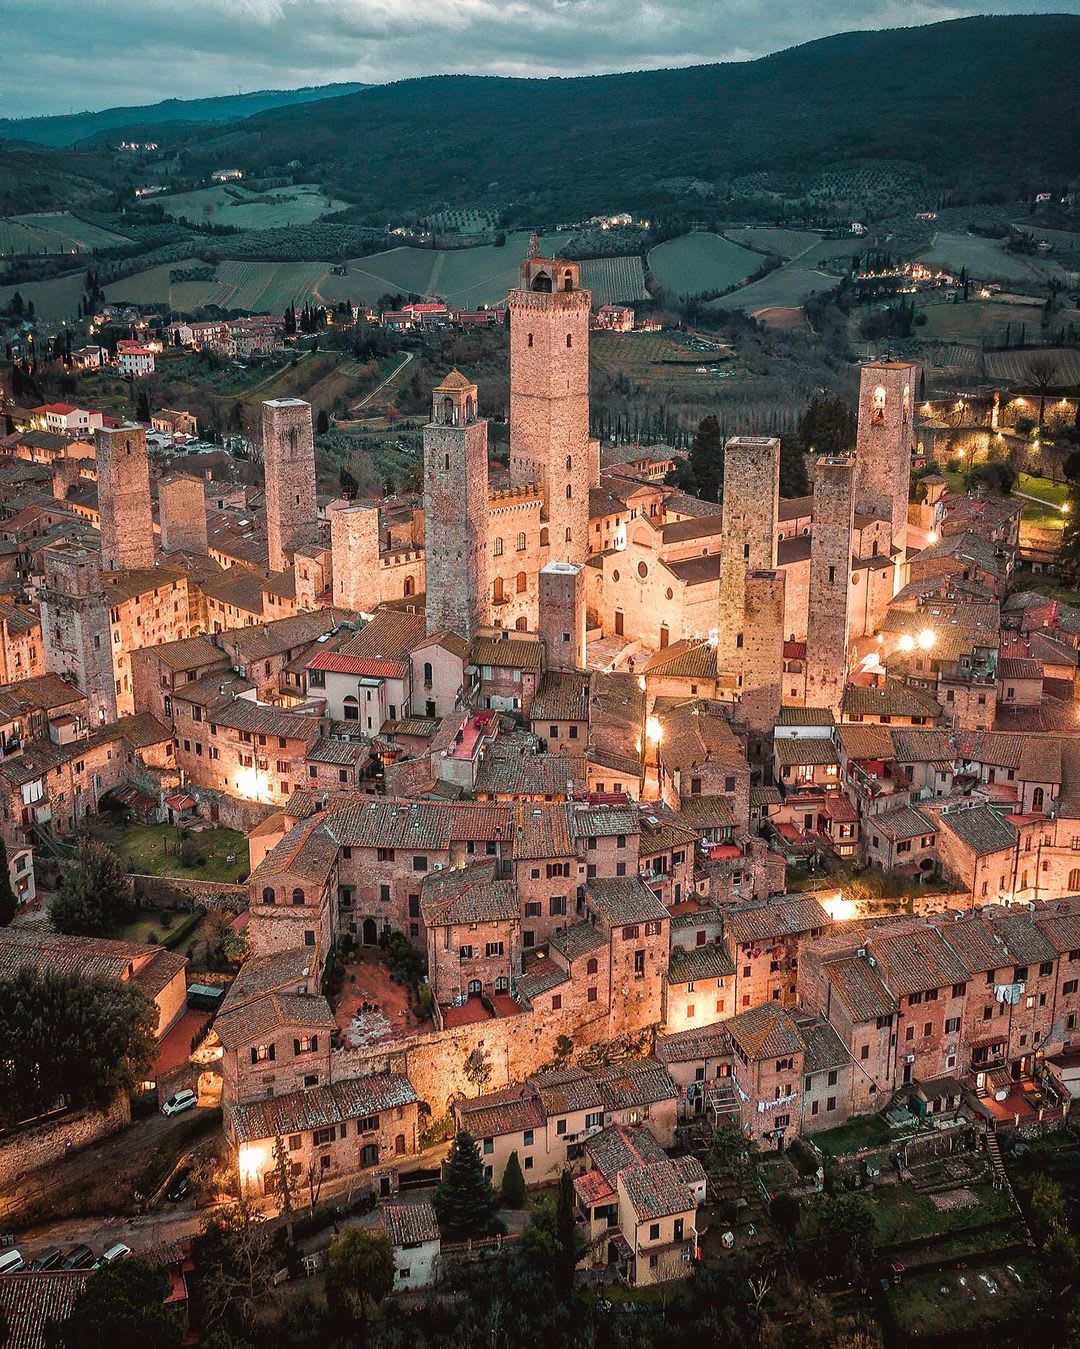 The medieval skyscrapers of San Gimignano, a walled hill town with towers dating back to the 13th century, Siena, Tuscany, Italy.